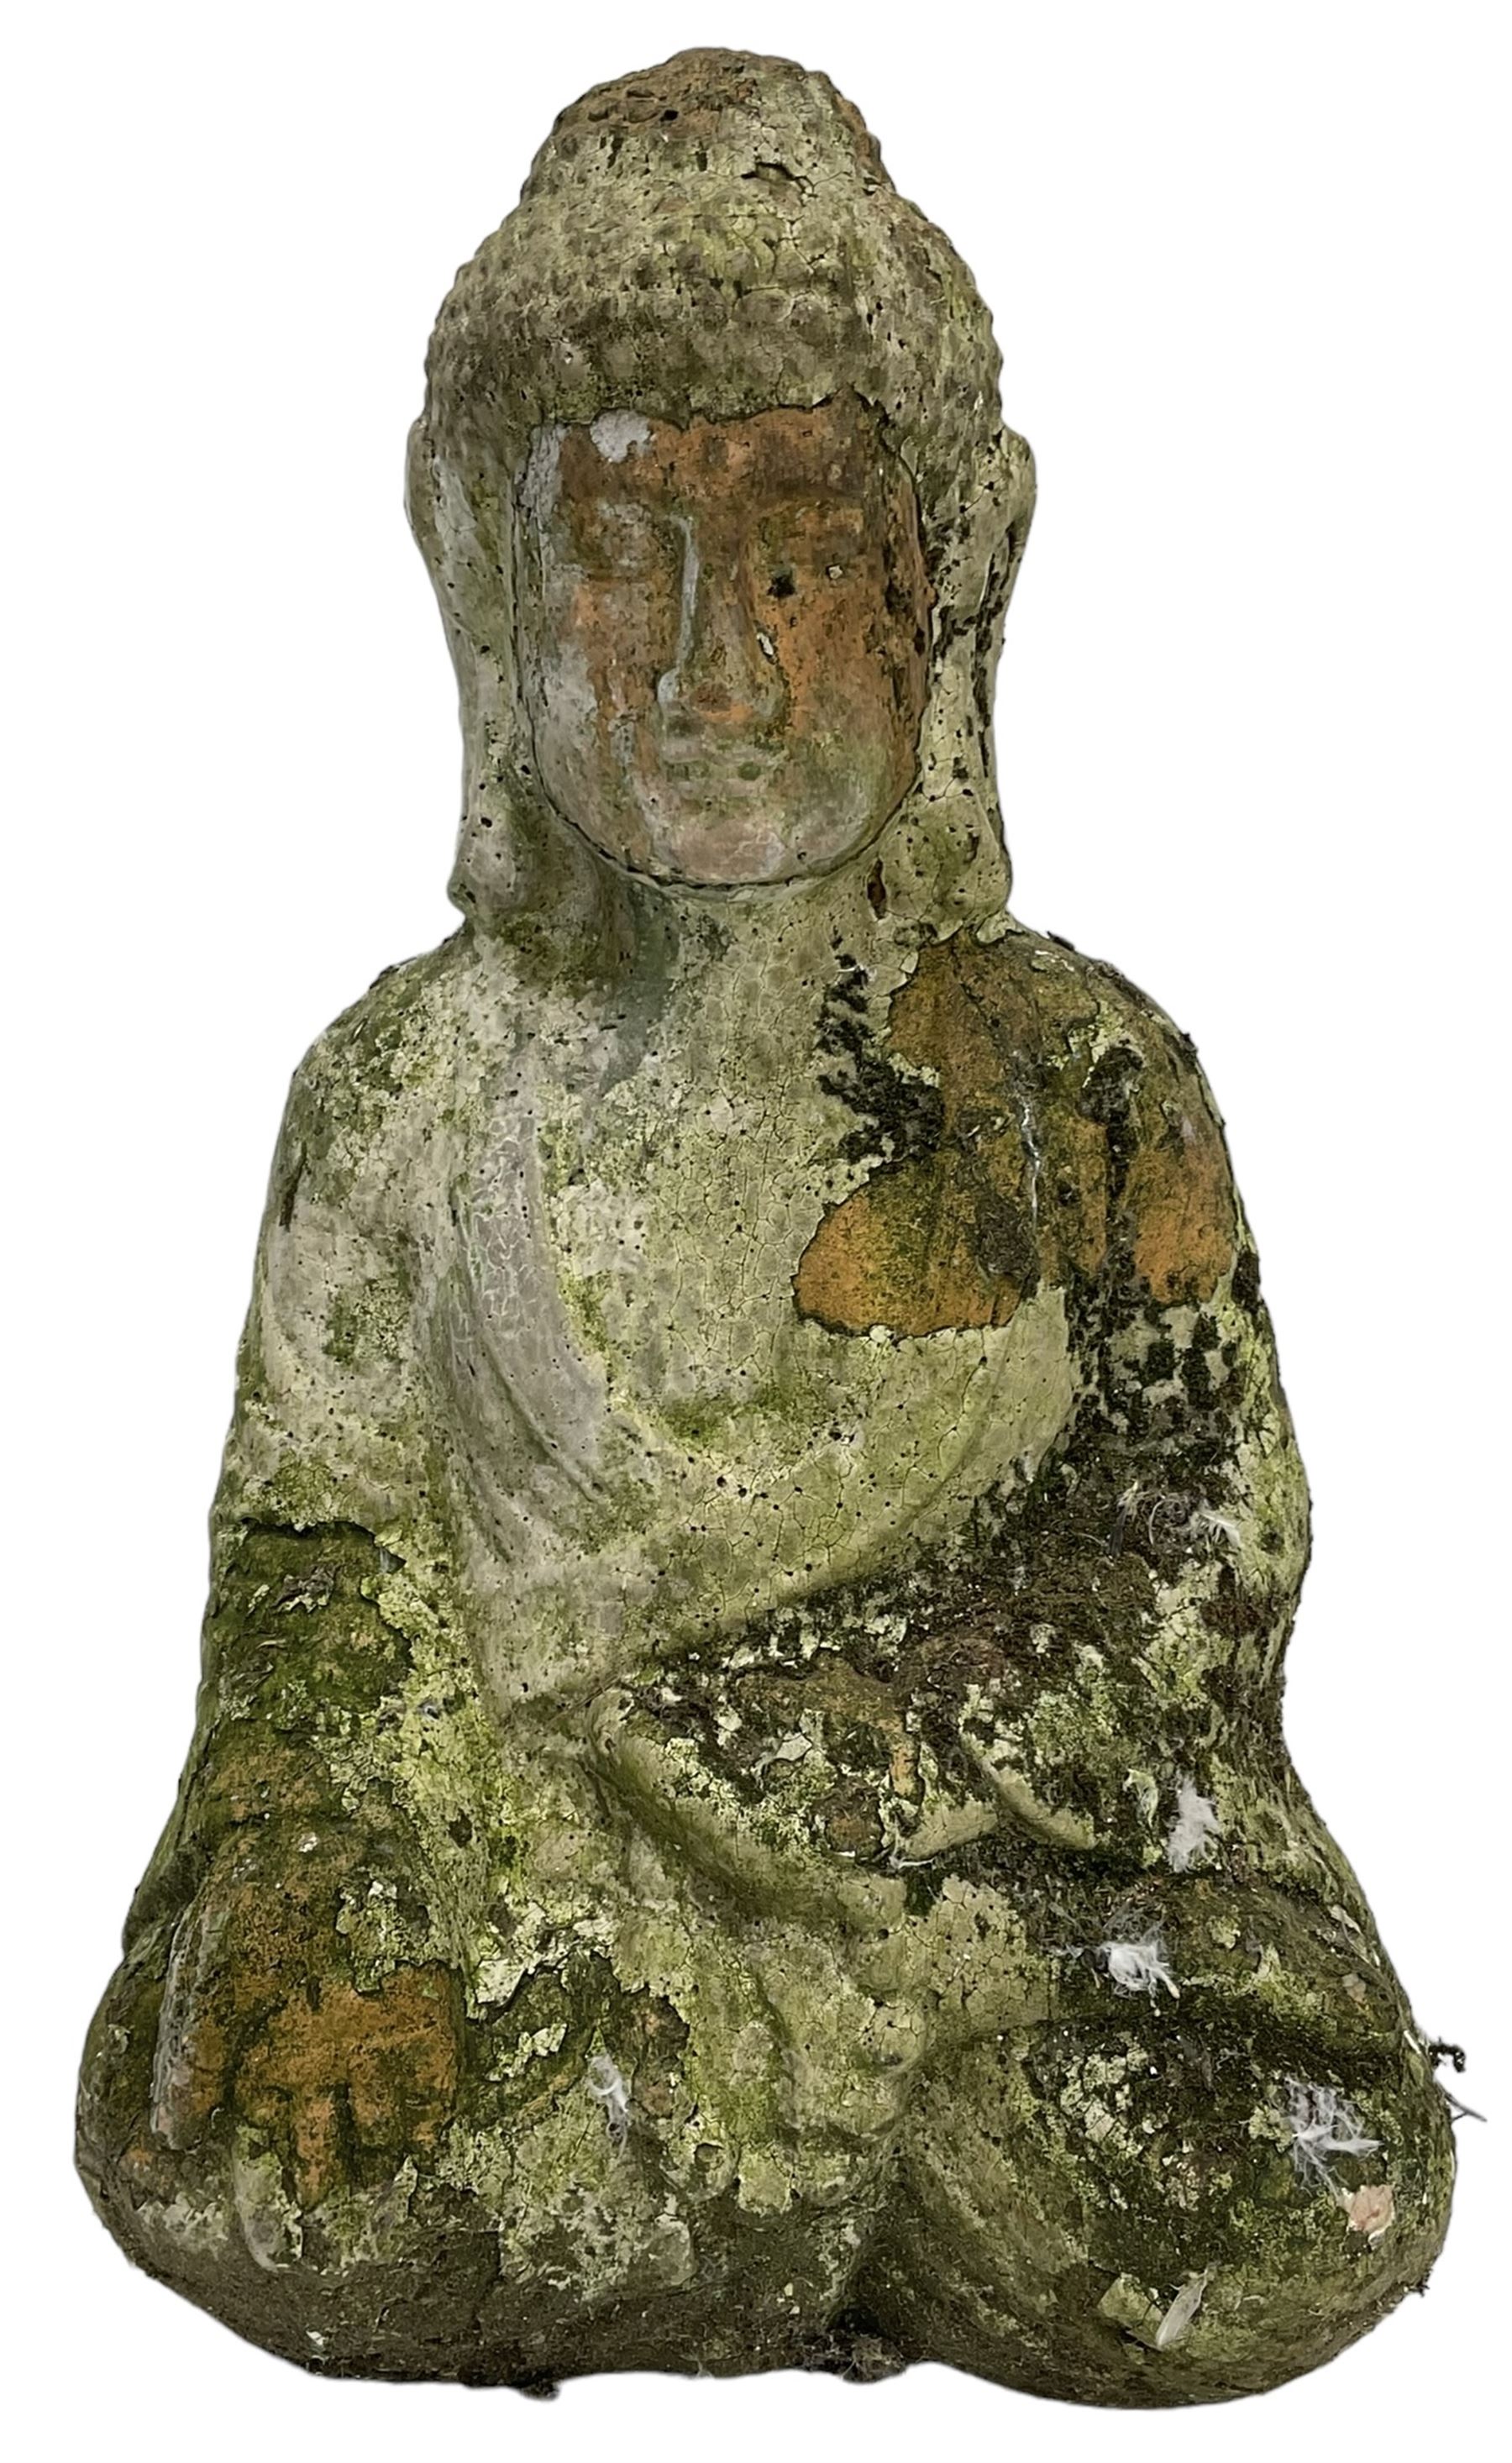 Terracotta garden figure in the form of a seated Buddha